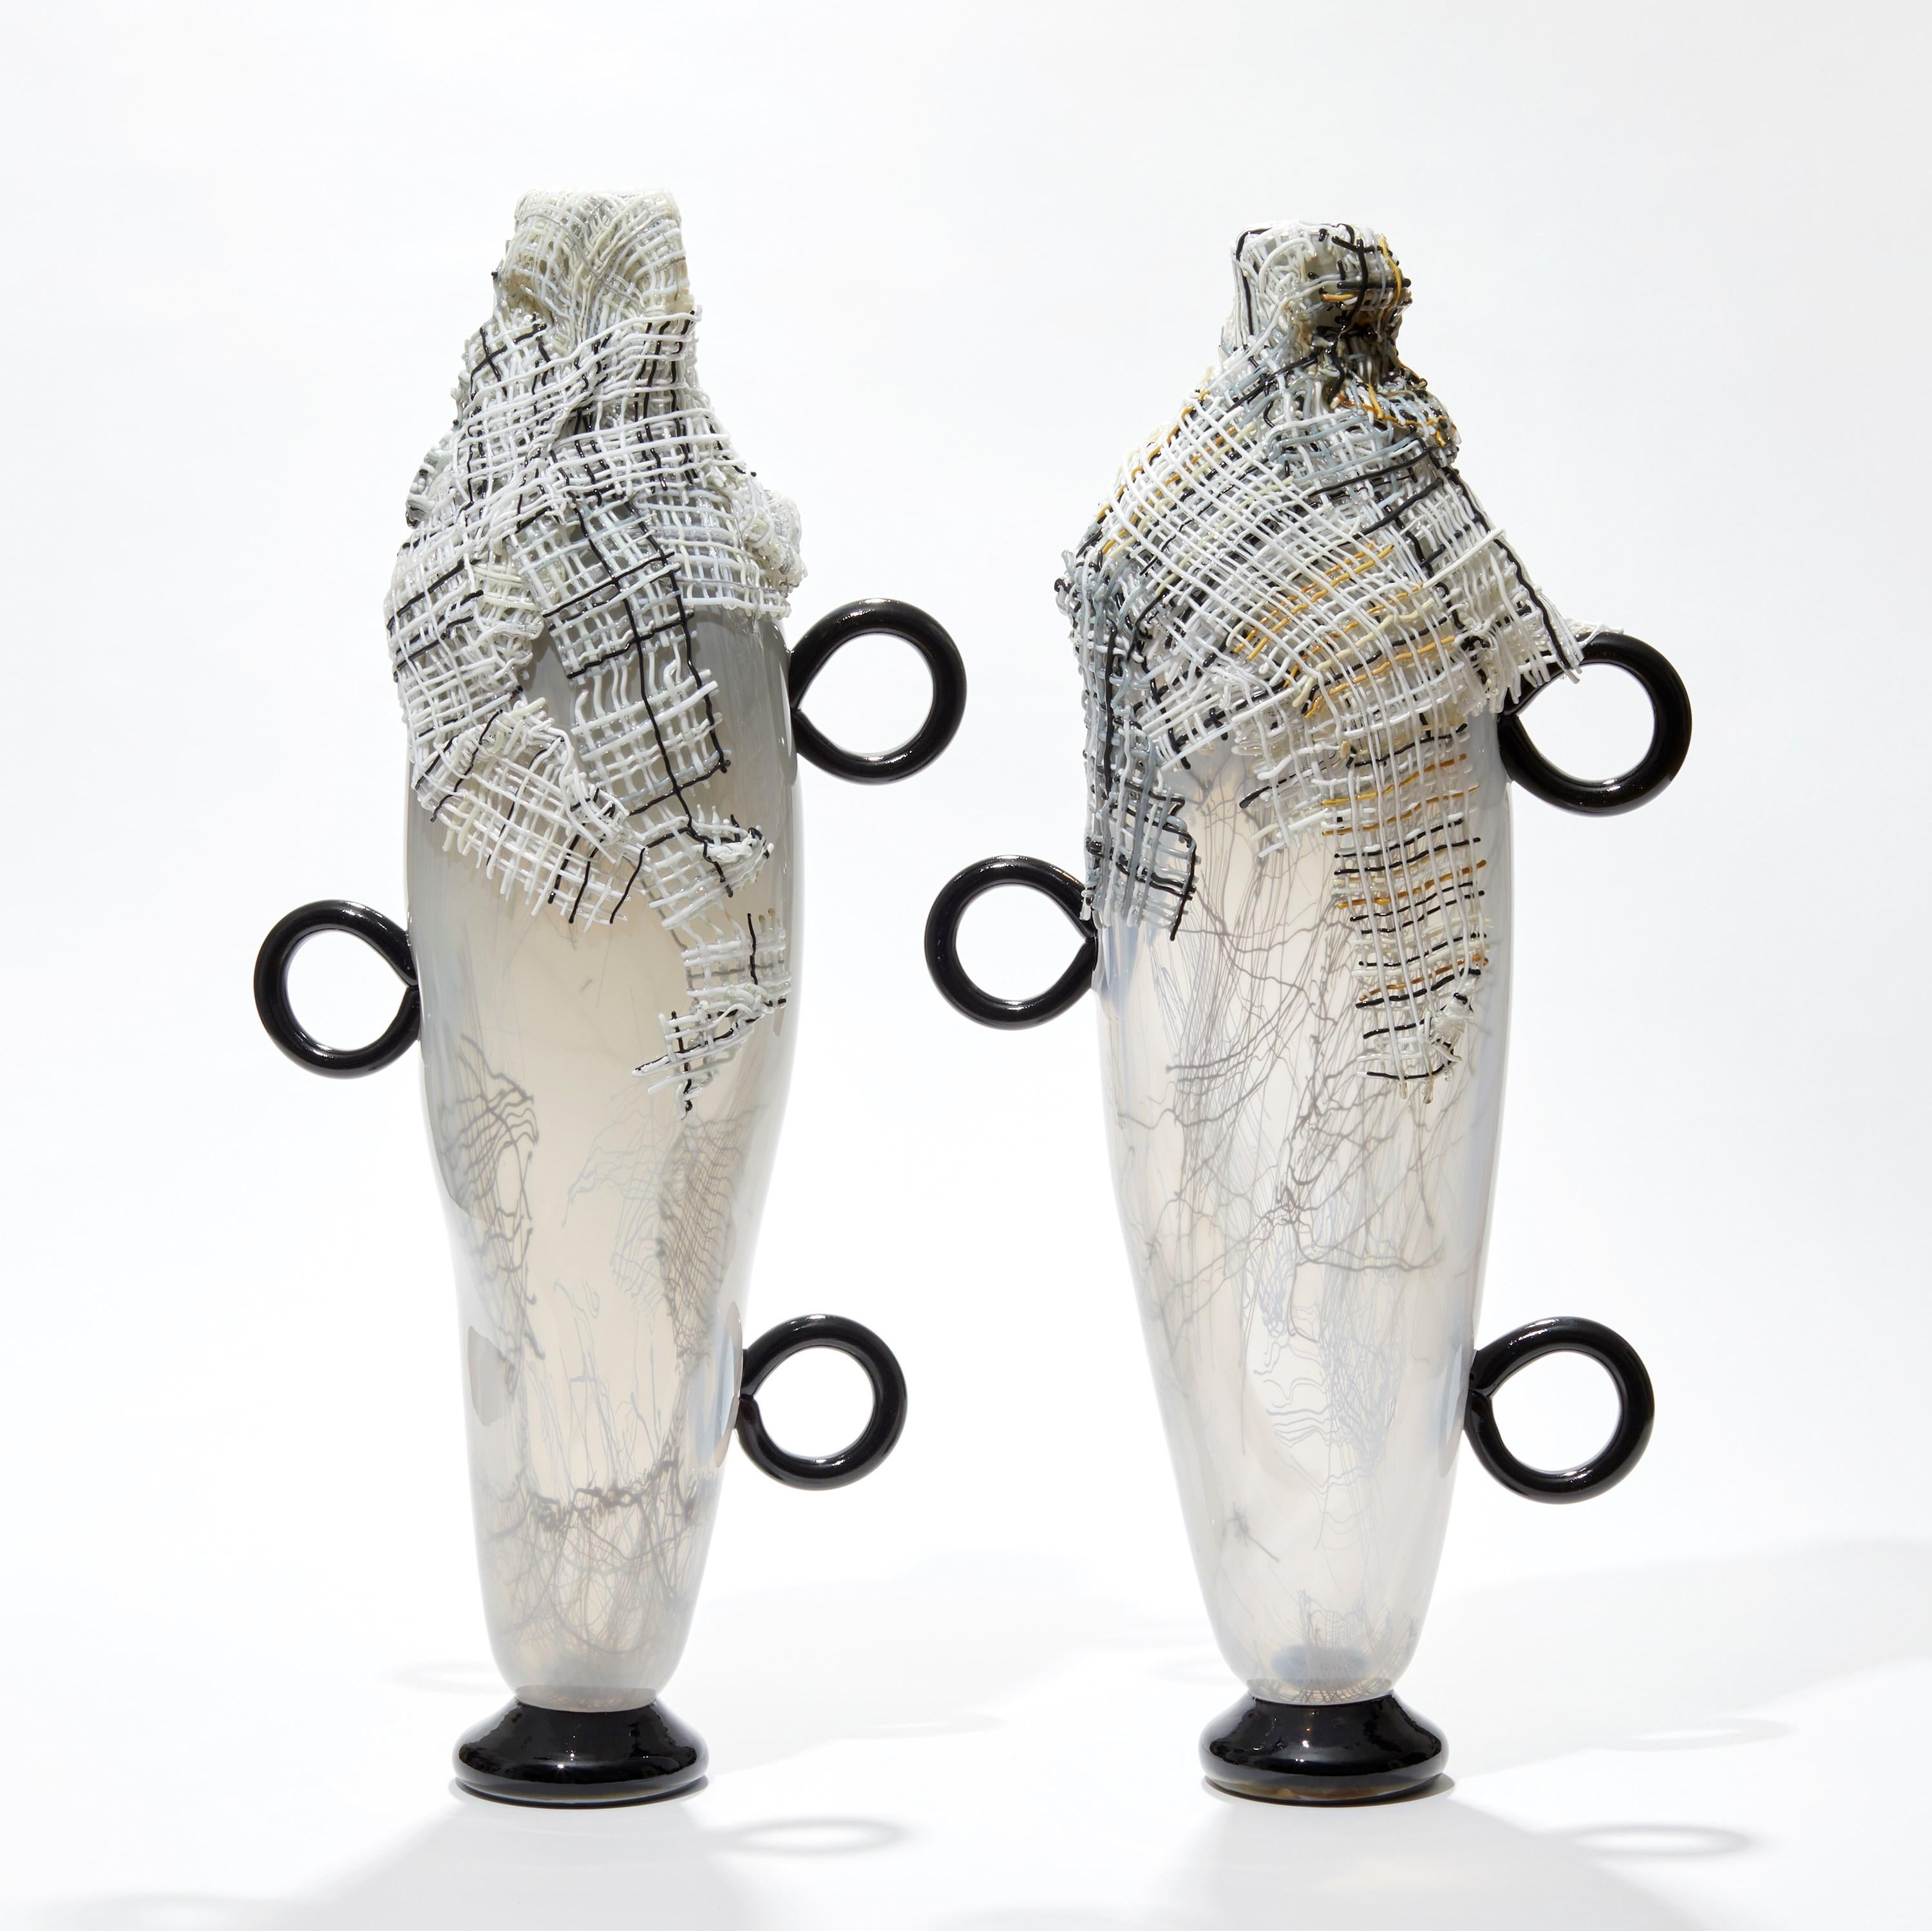 Only Hope Remains I, black & white standing glass sculpture by Cathryn Shilling In New Condition For Sale In London, GB